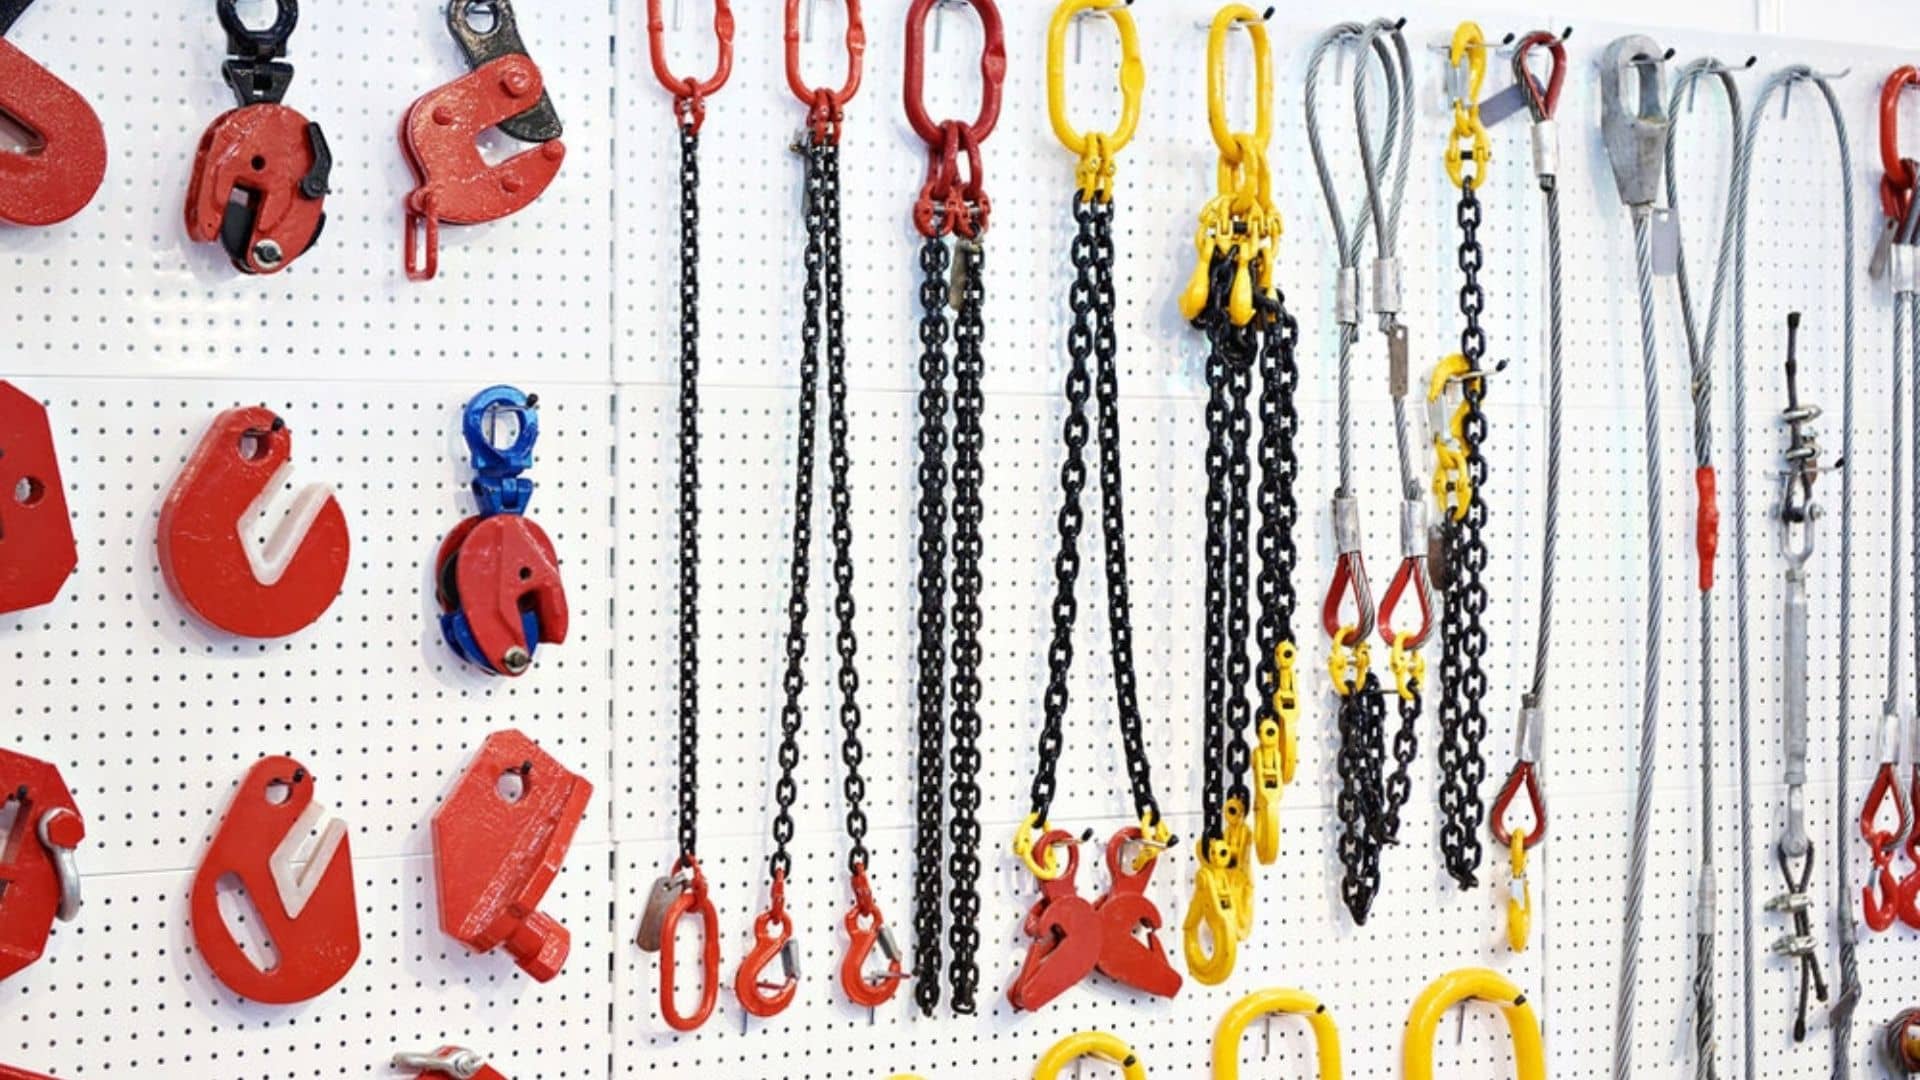 Trusted Lifting Equipment Supplier